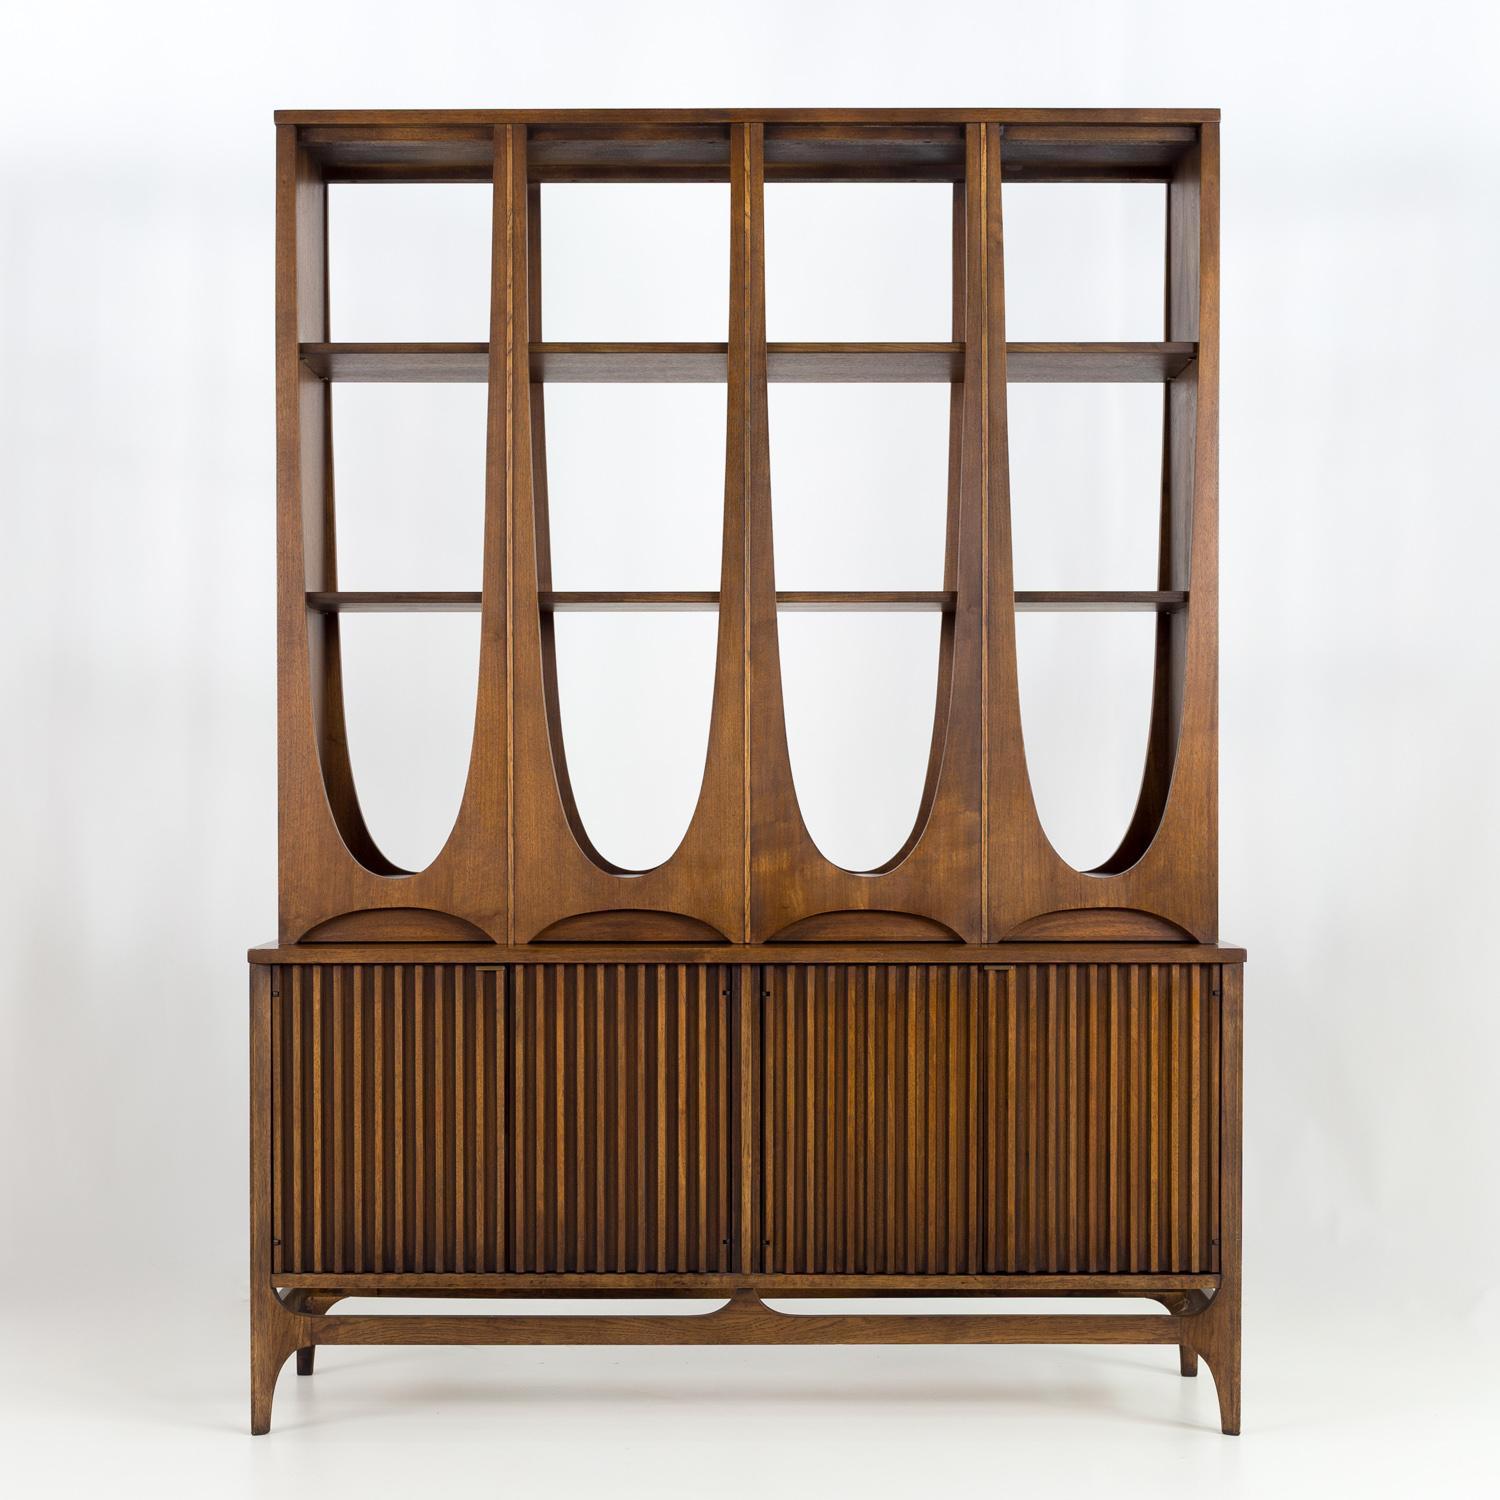 Broyhill Brasilia Mid Century Room Divider Wall Unit Shelving

This wall unit measures: 54 wide x 17 deep x 72.5 inches high

The base measures: 54 wide x 17 deep x 26.5 inches high

The top measures: 52 wide x 13.5 deep x 46 inches high

All pieces